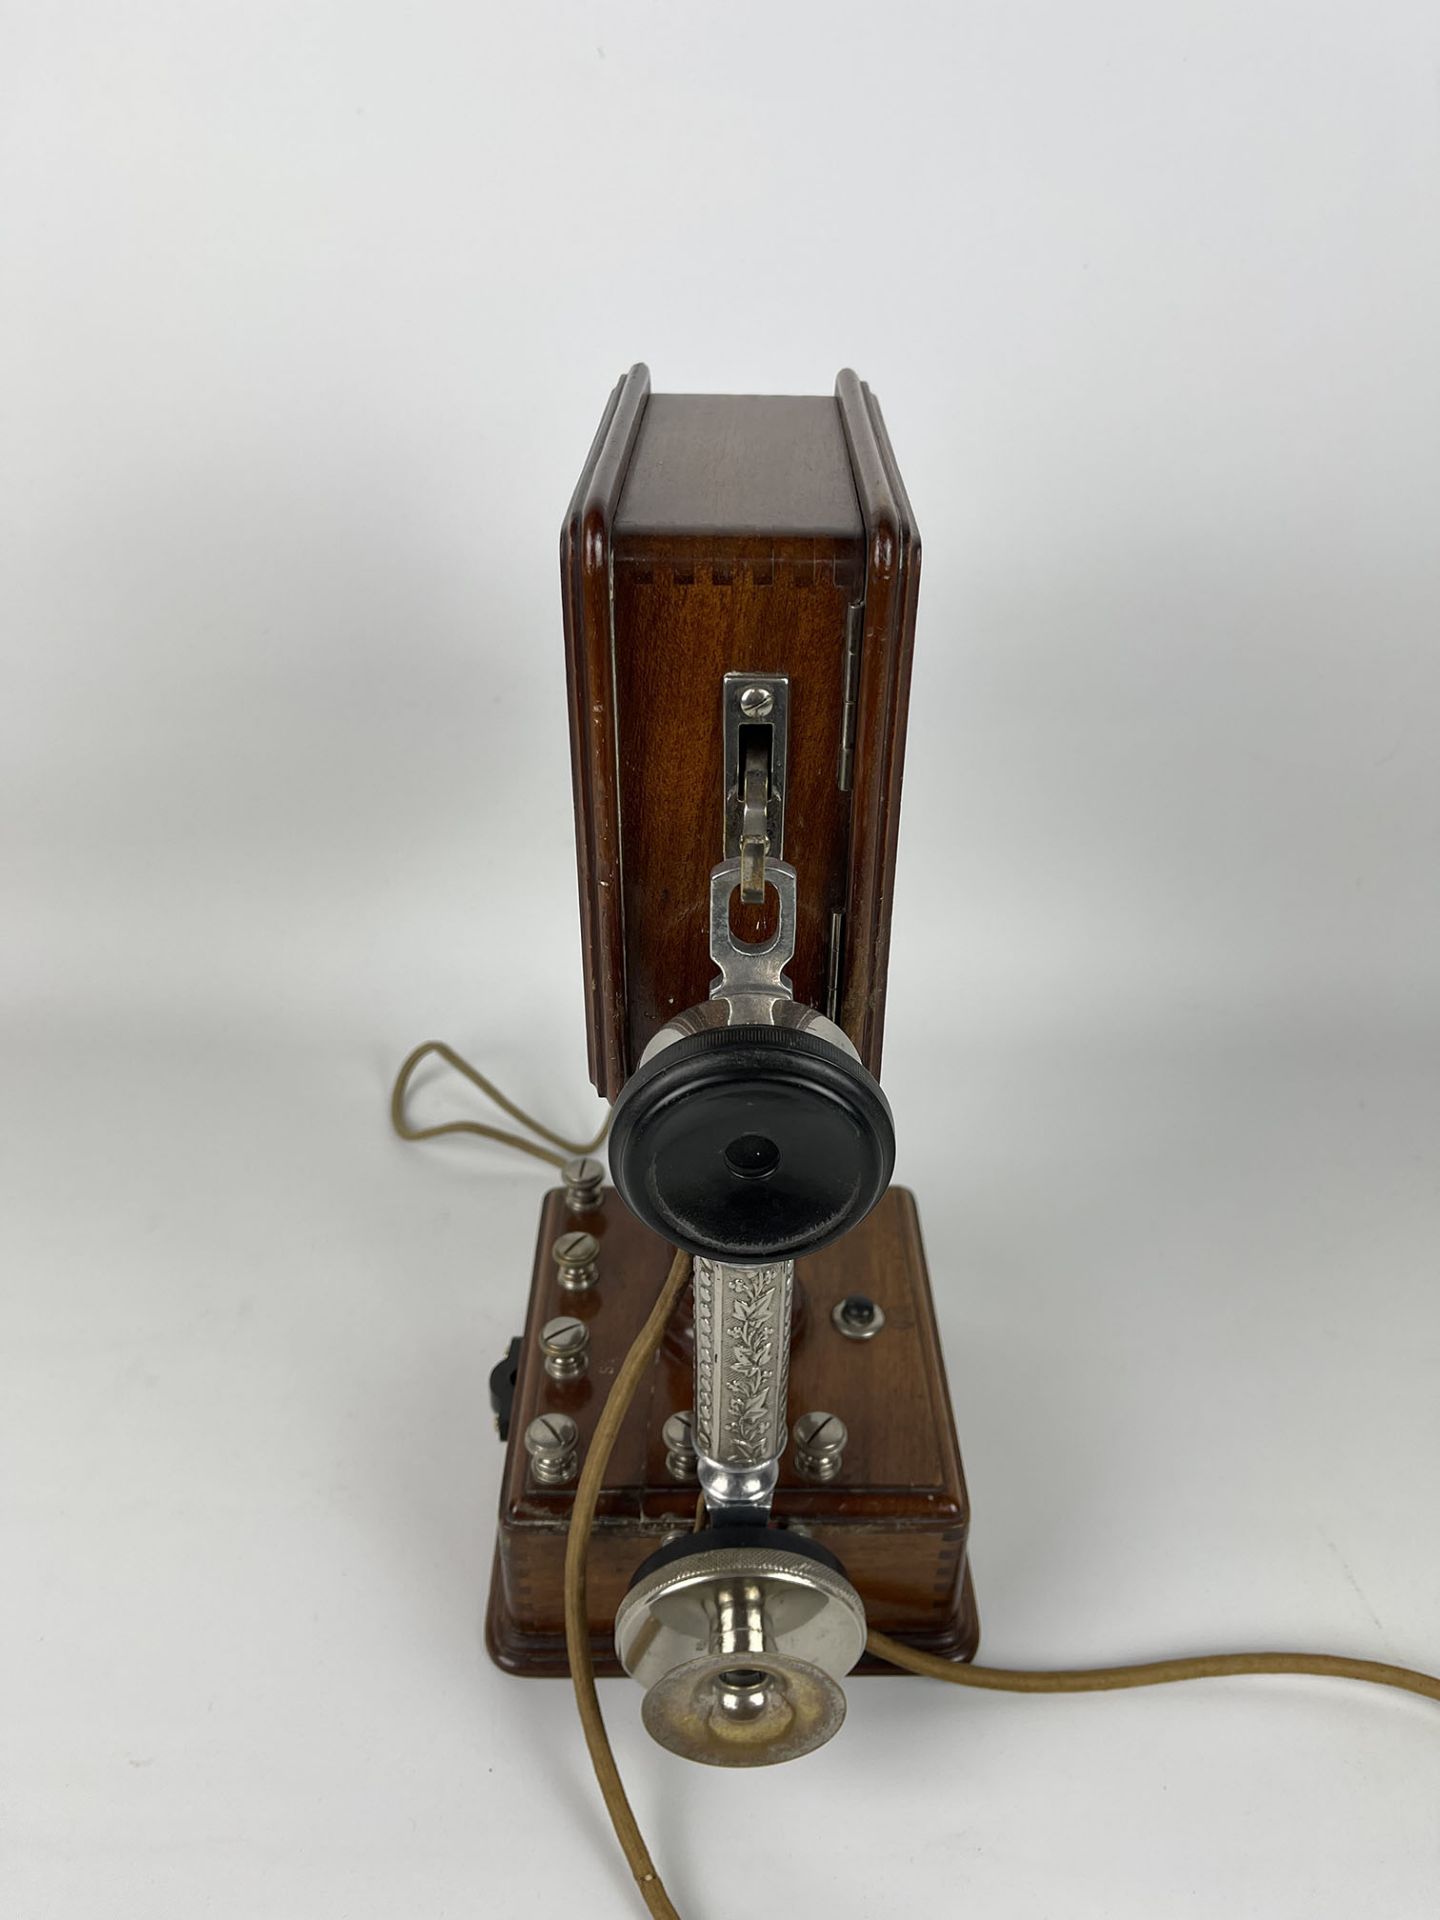 Early Alfred Burgunder Mobile Telephone, ca. 1910, France - Image 3 of 13